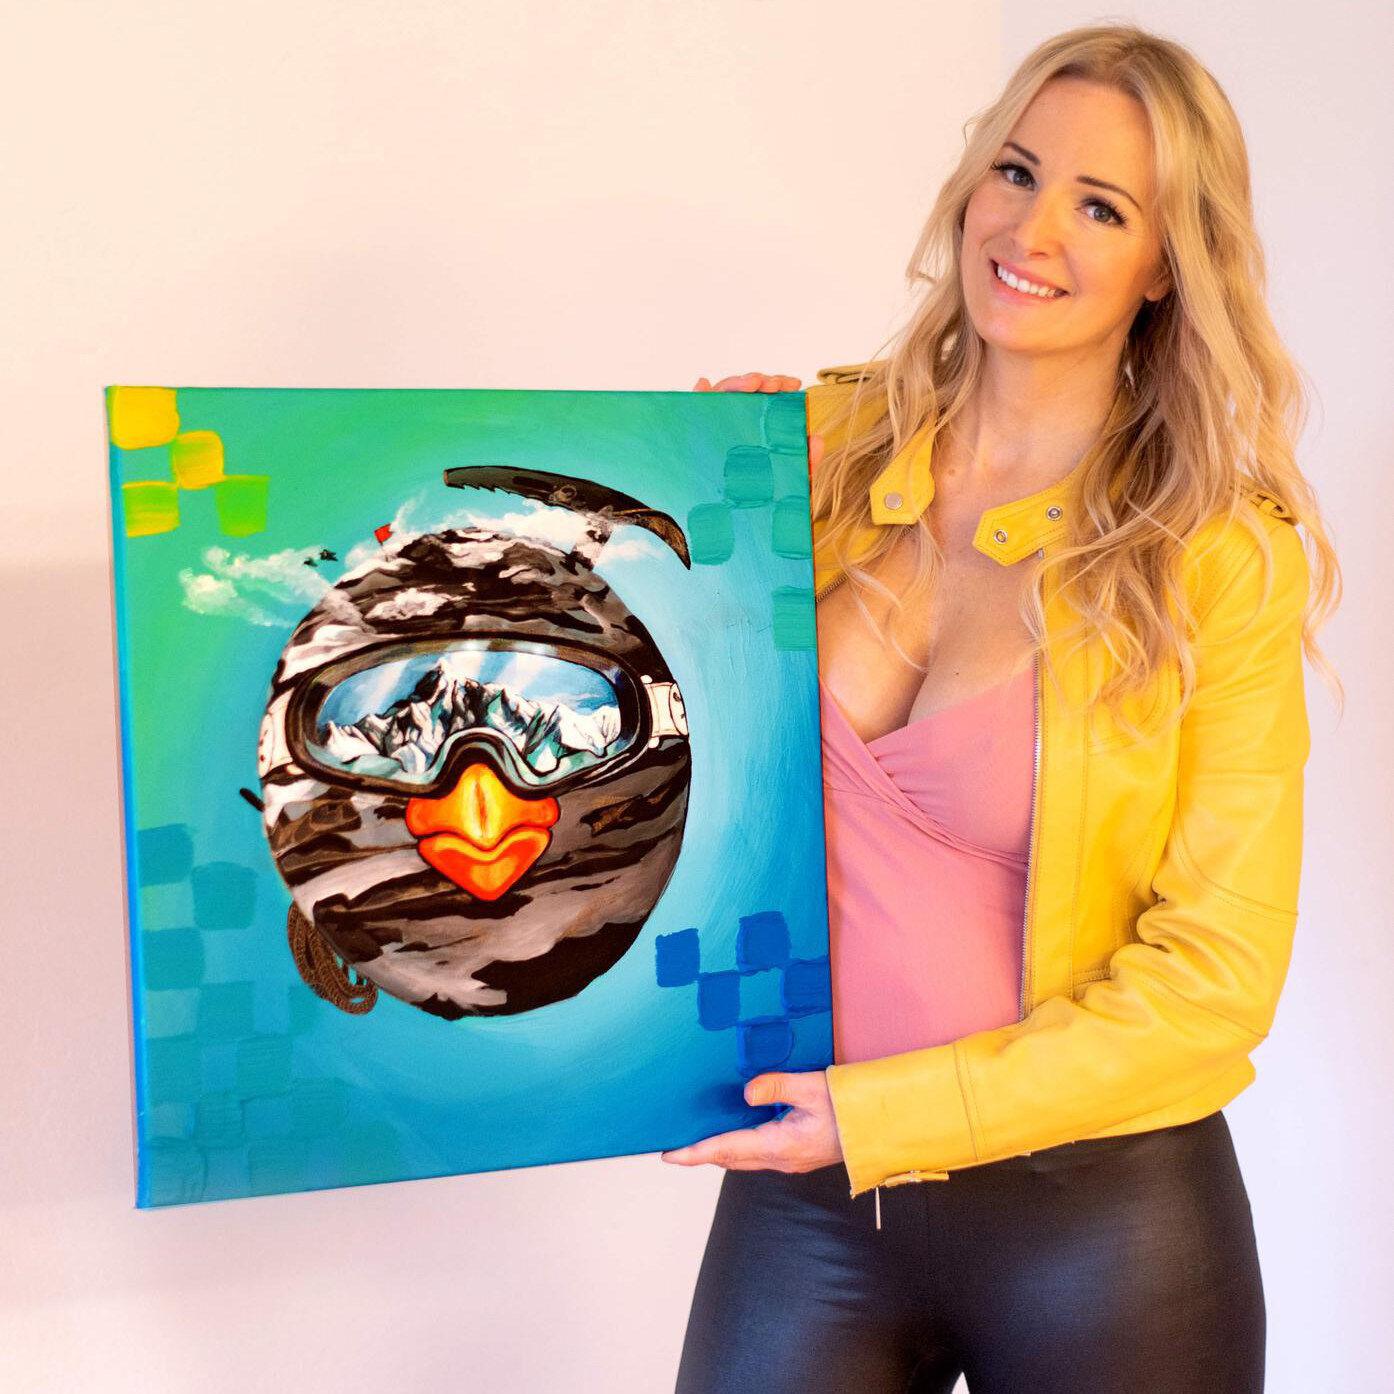 Hatchlingz inc. and artist Marie Plosjö combine to take